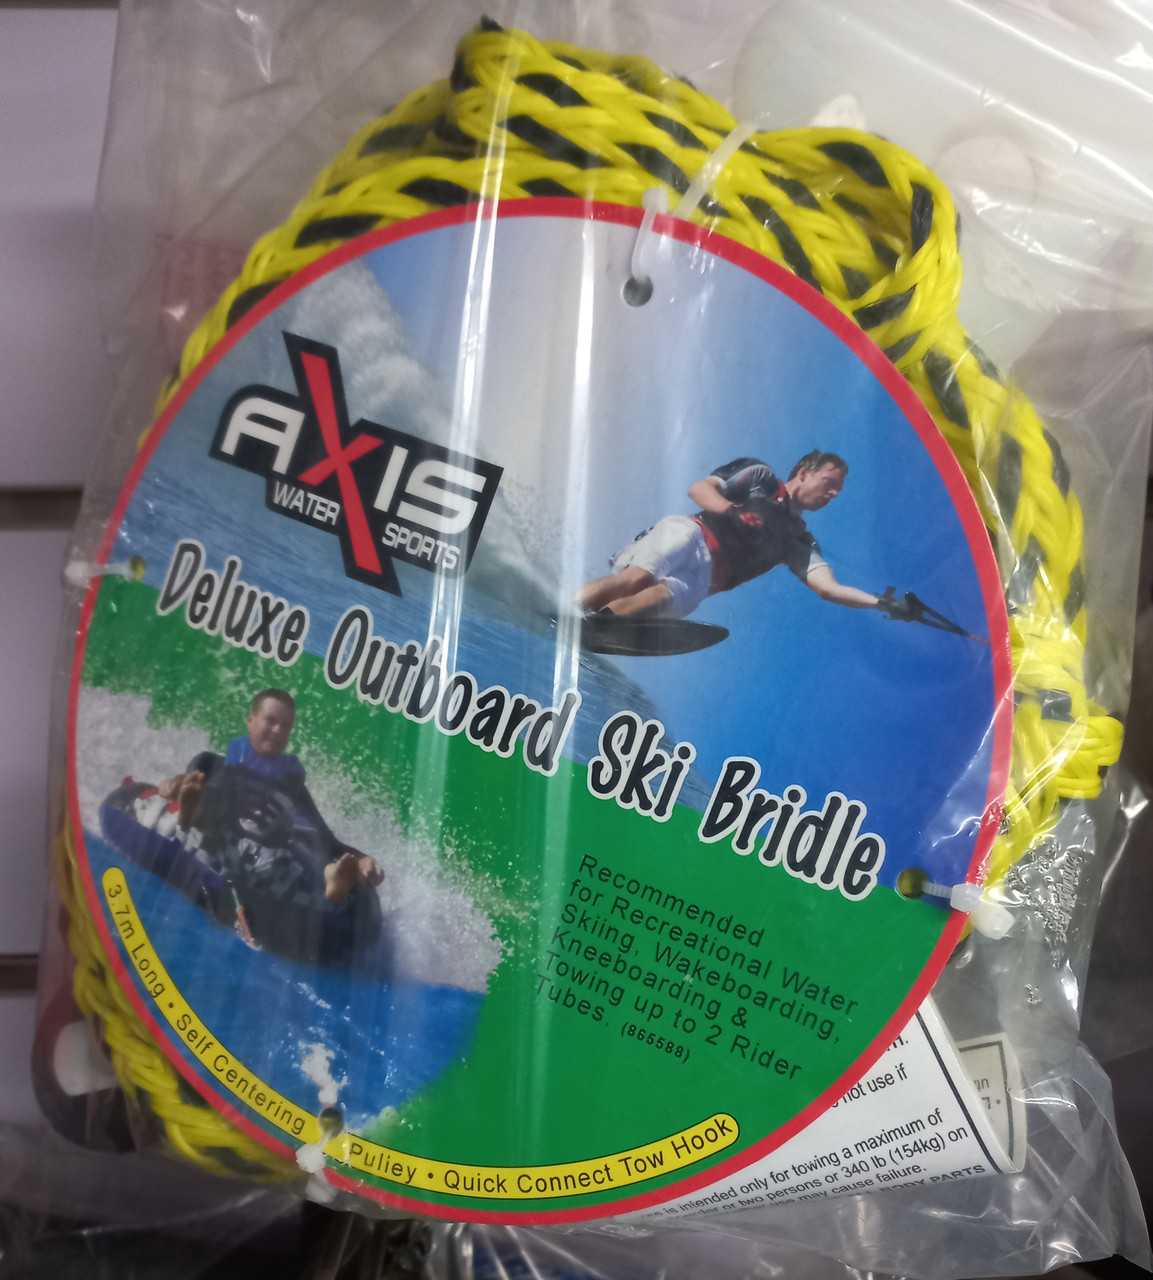 Axis Deluxe Outboard Ski Bridle